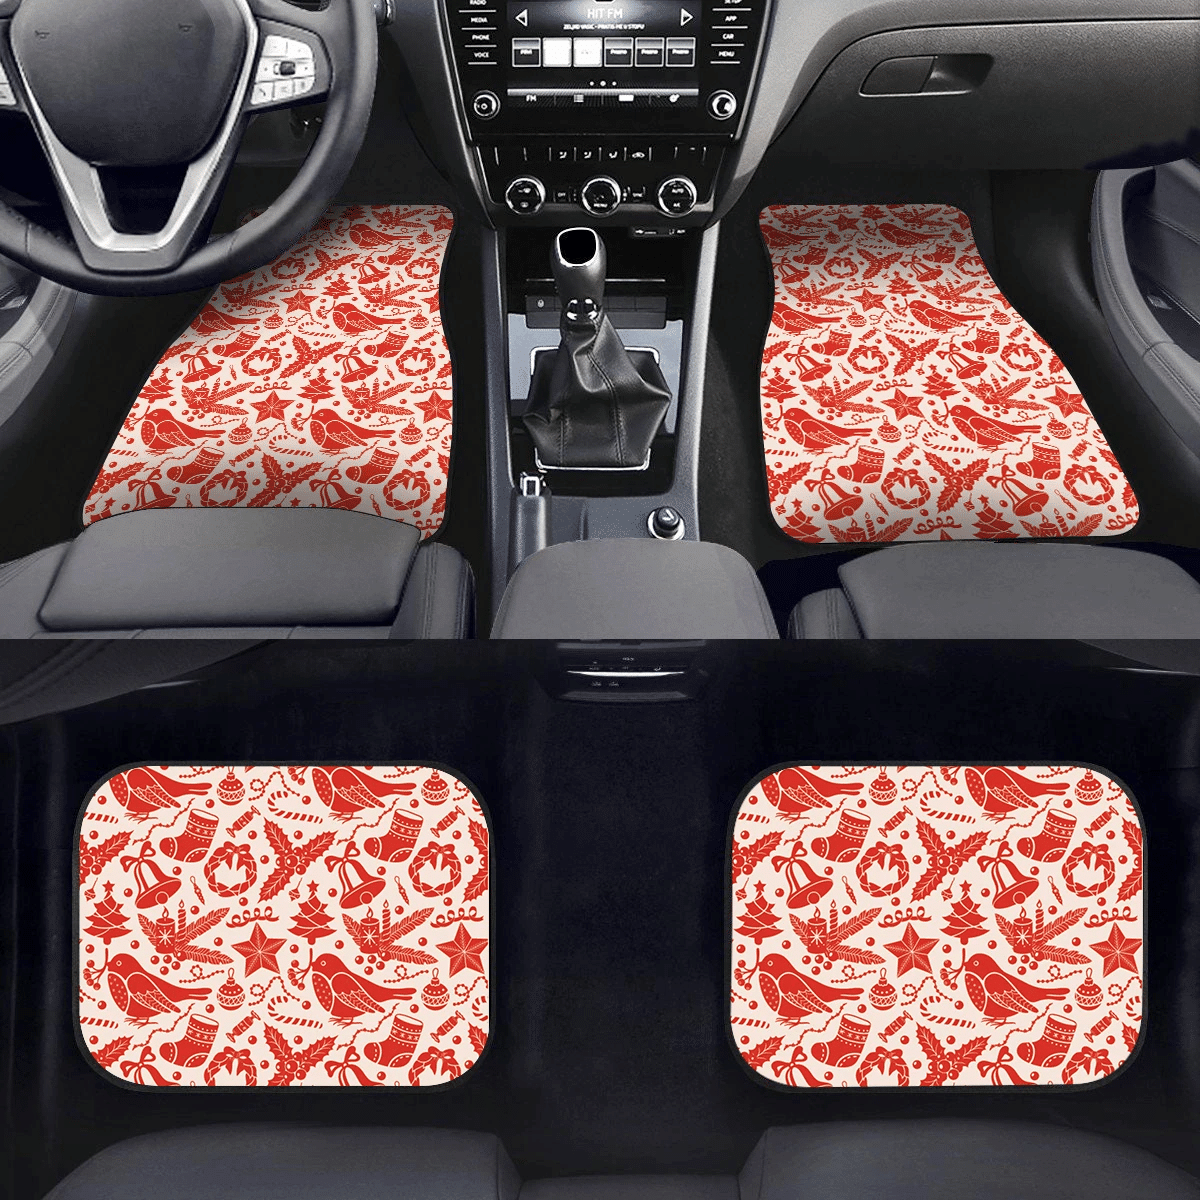 Red Christmas With Bell Candy And Bird Car Mats Car Floor Mats